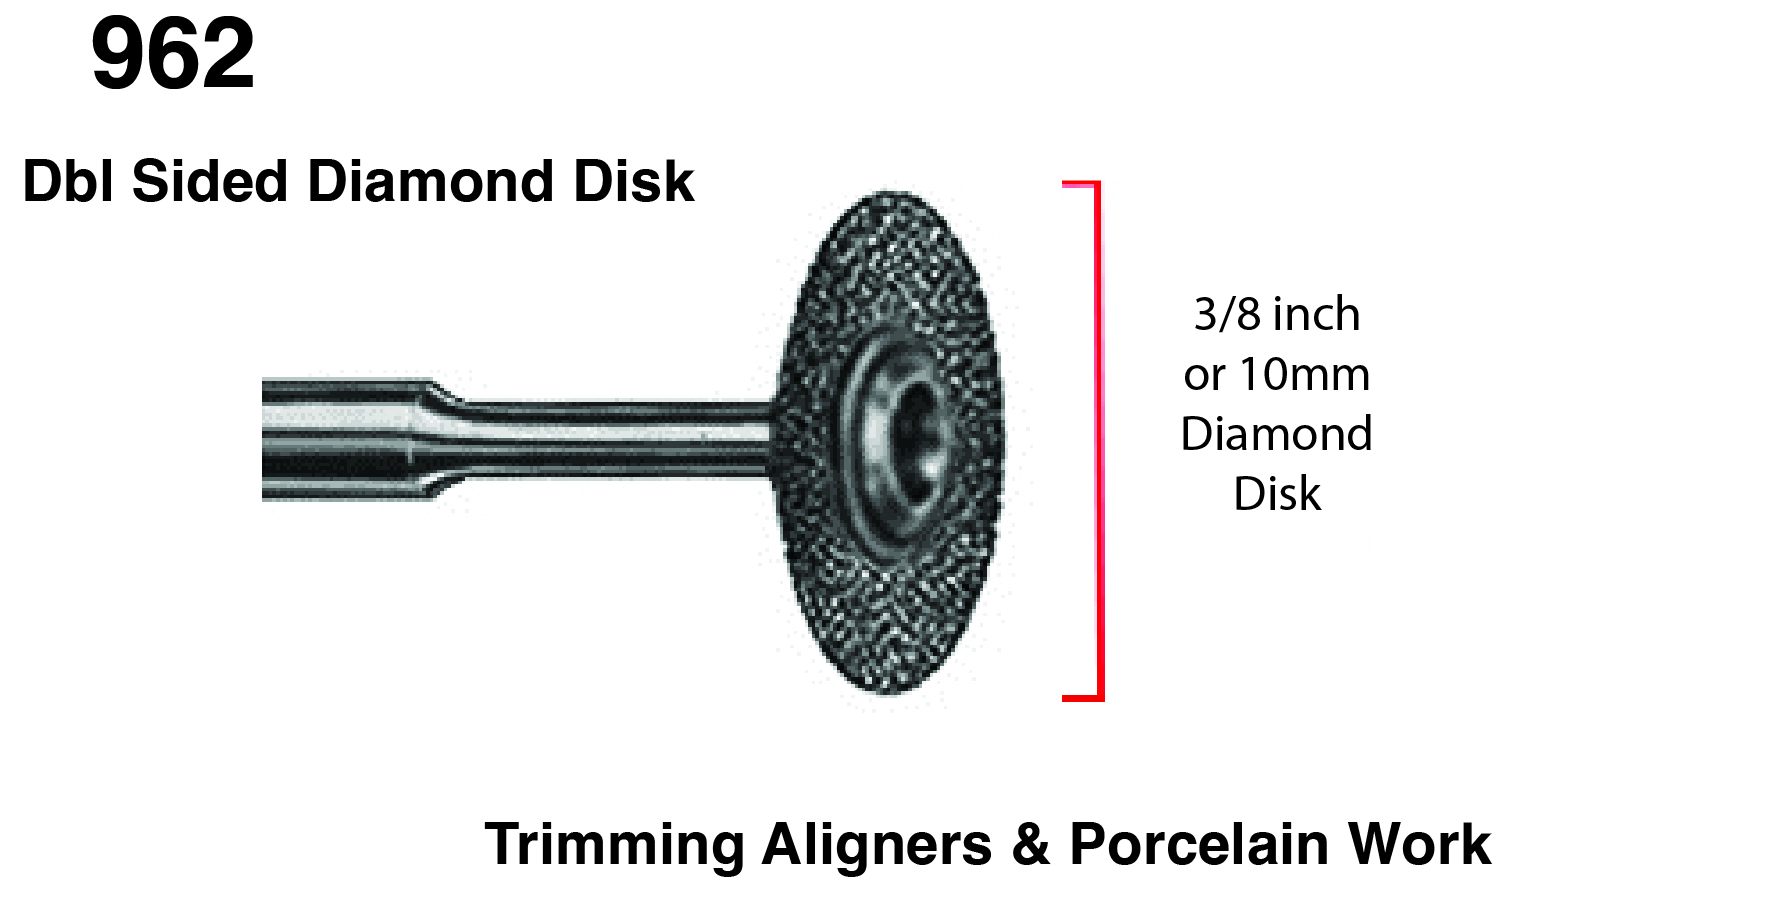 10mm Double Sided Diamond Disk